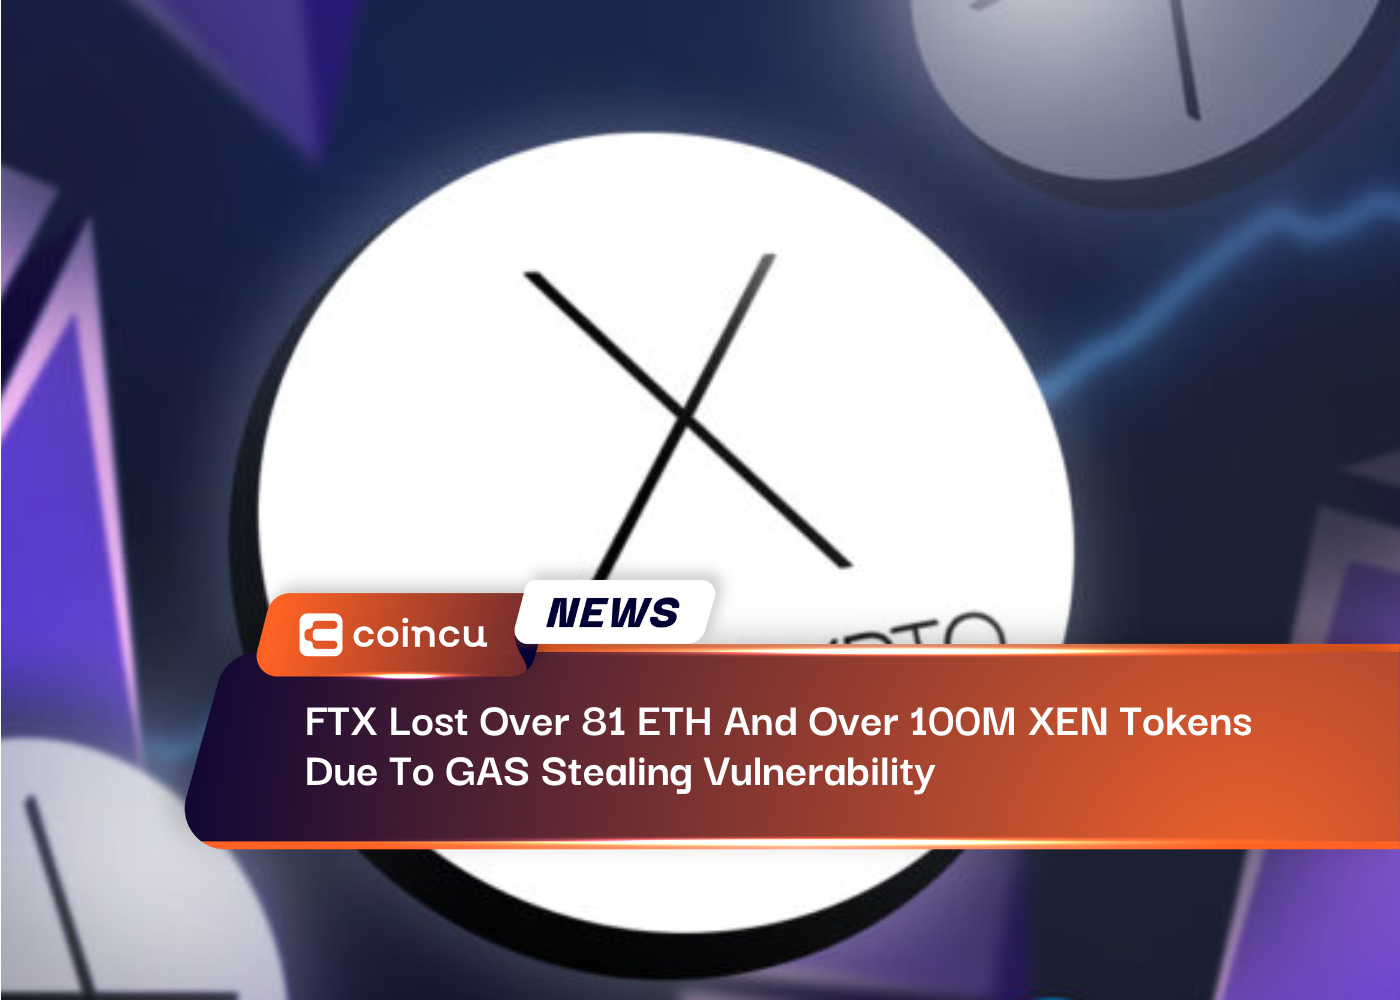 FTX Lost Over 81 ETH And Over 100M XEN Tokens Due To GAS Stealing Vulnerability